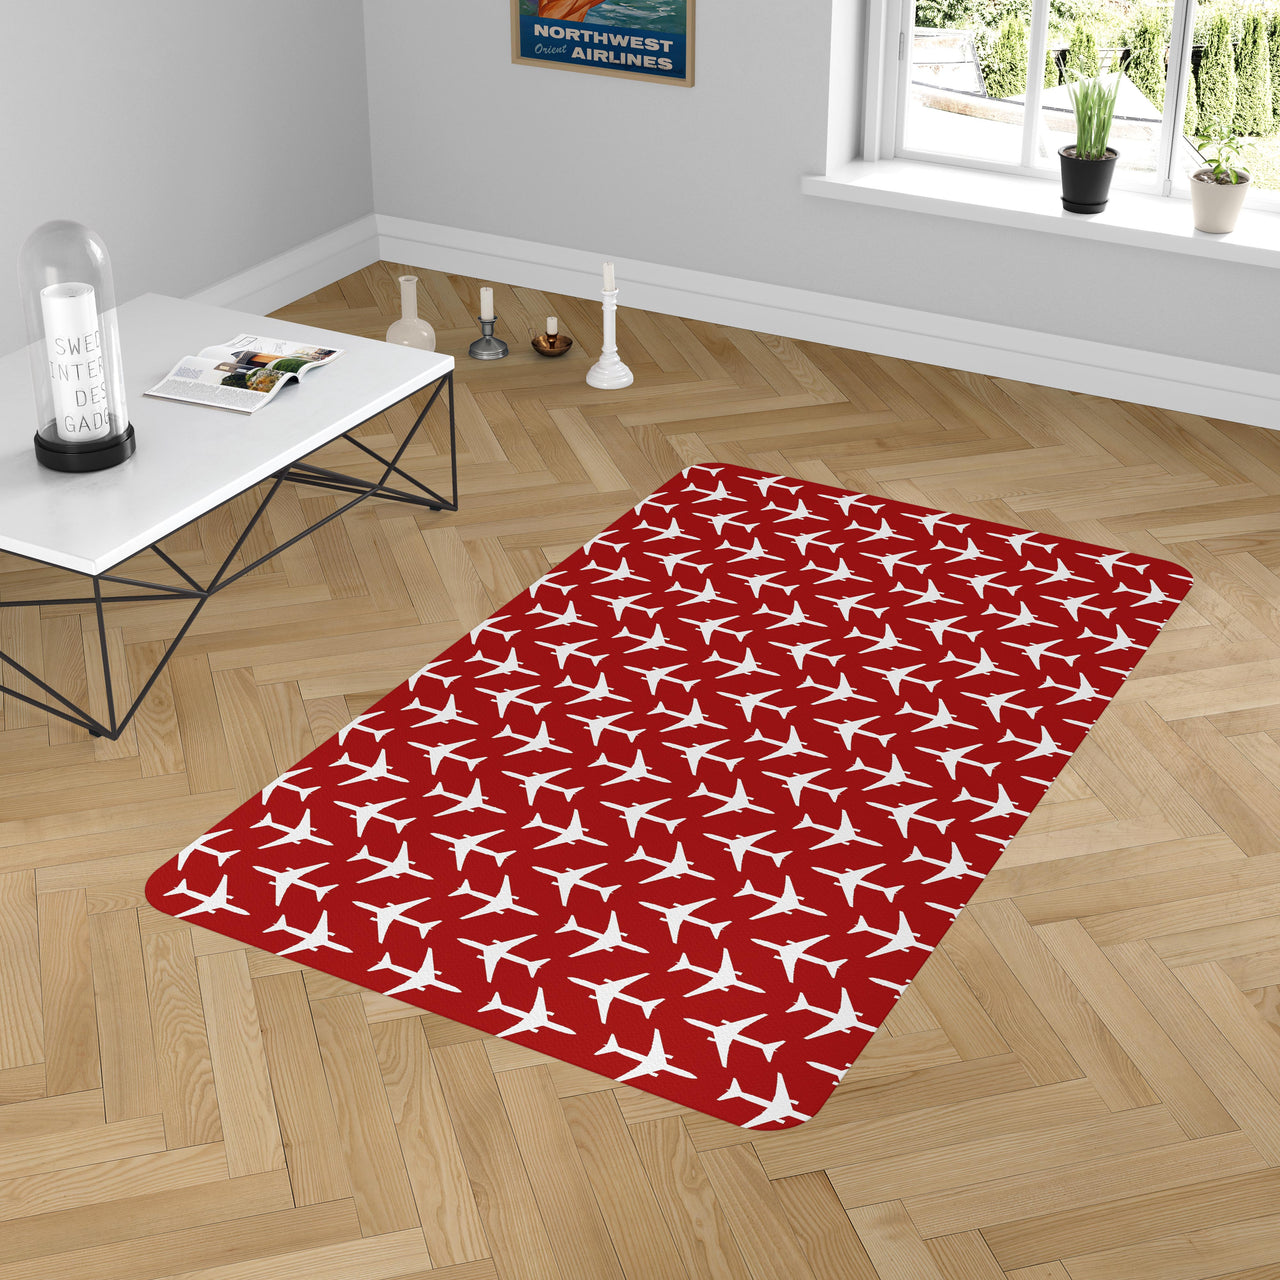 Perfectly Sized Seamless Airplanes (Red) Designed Carpet & Floor Mats